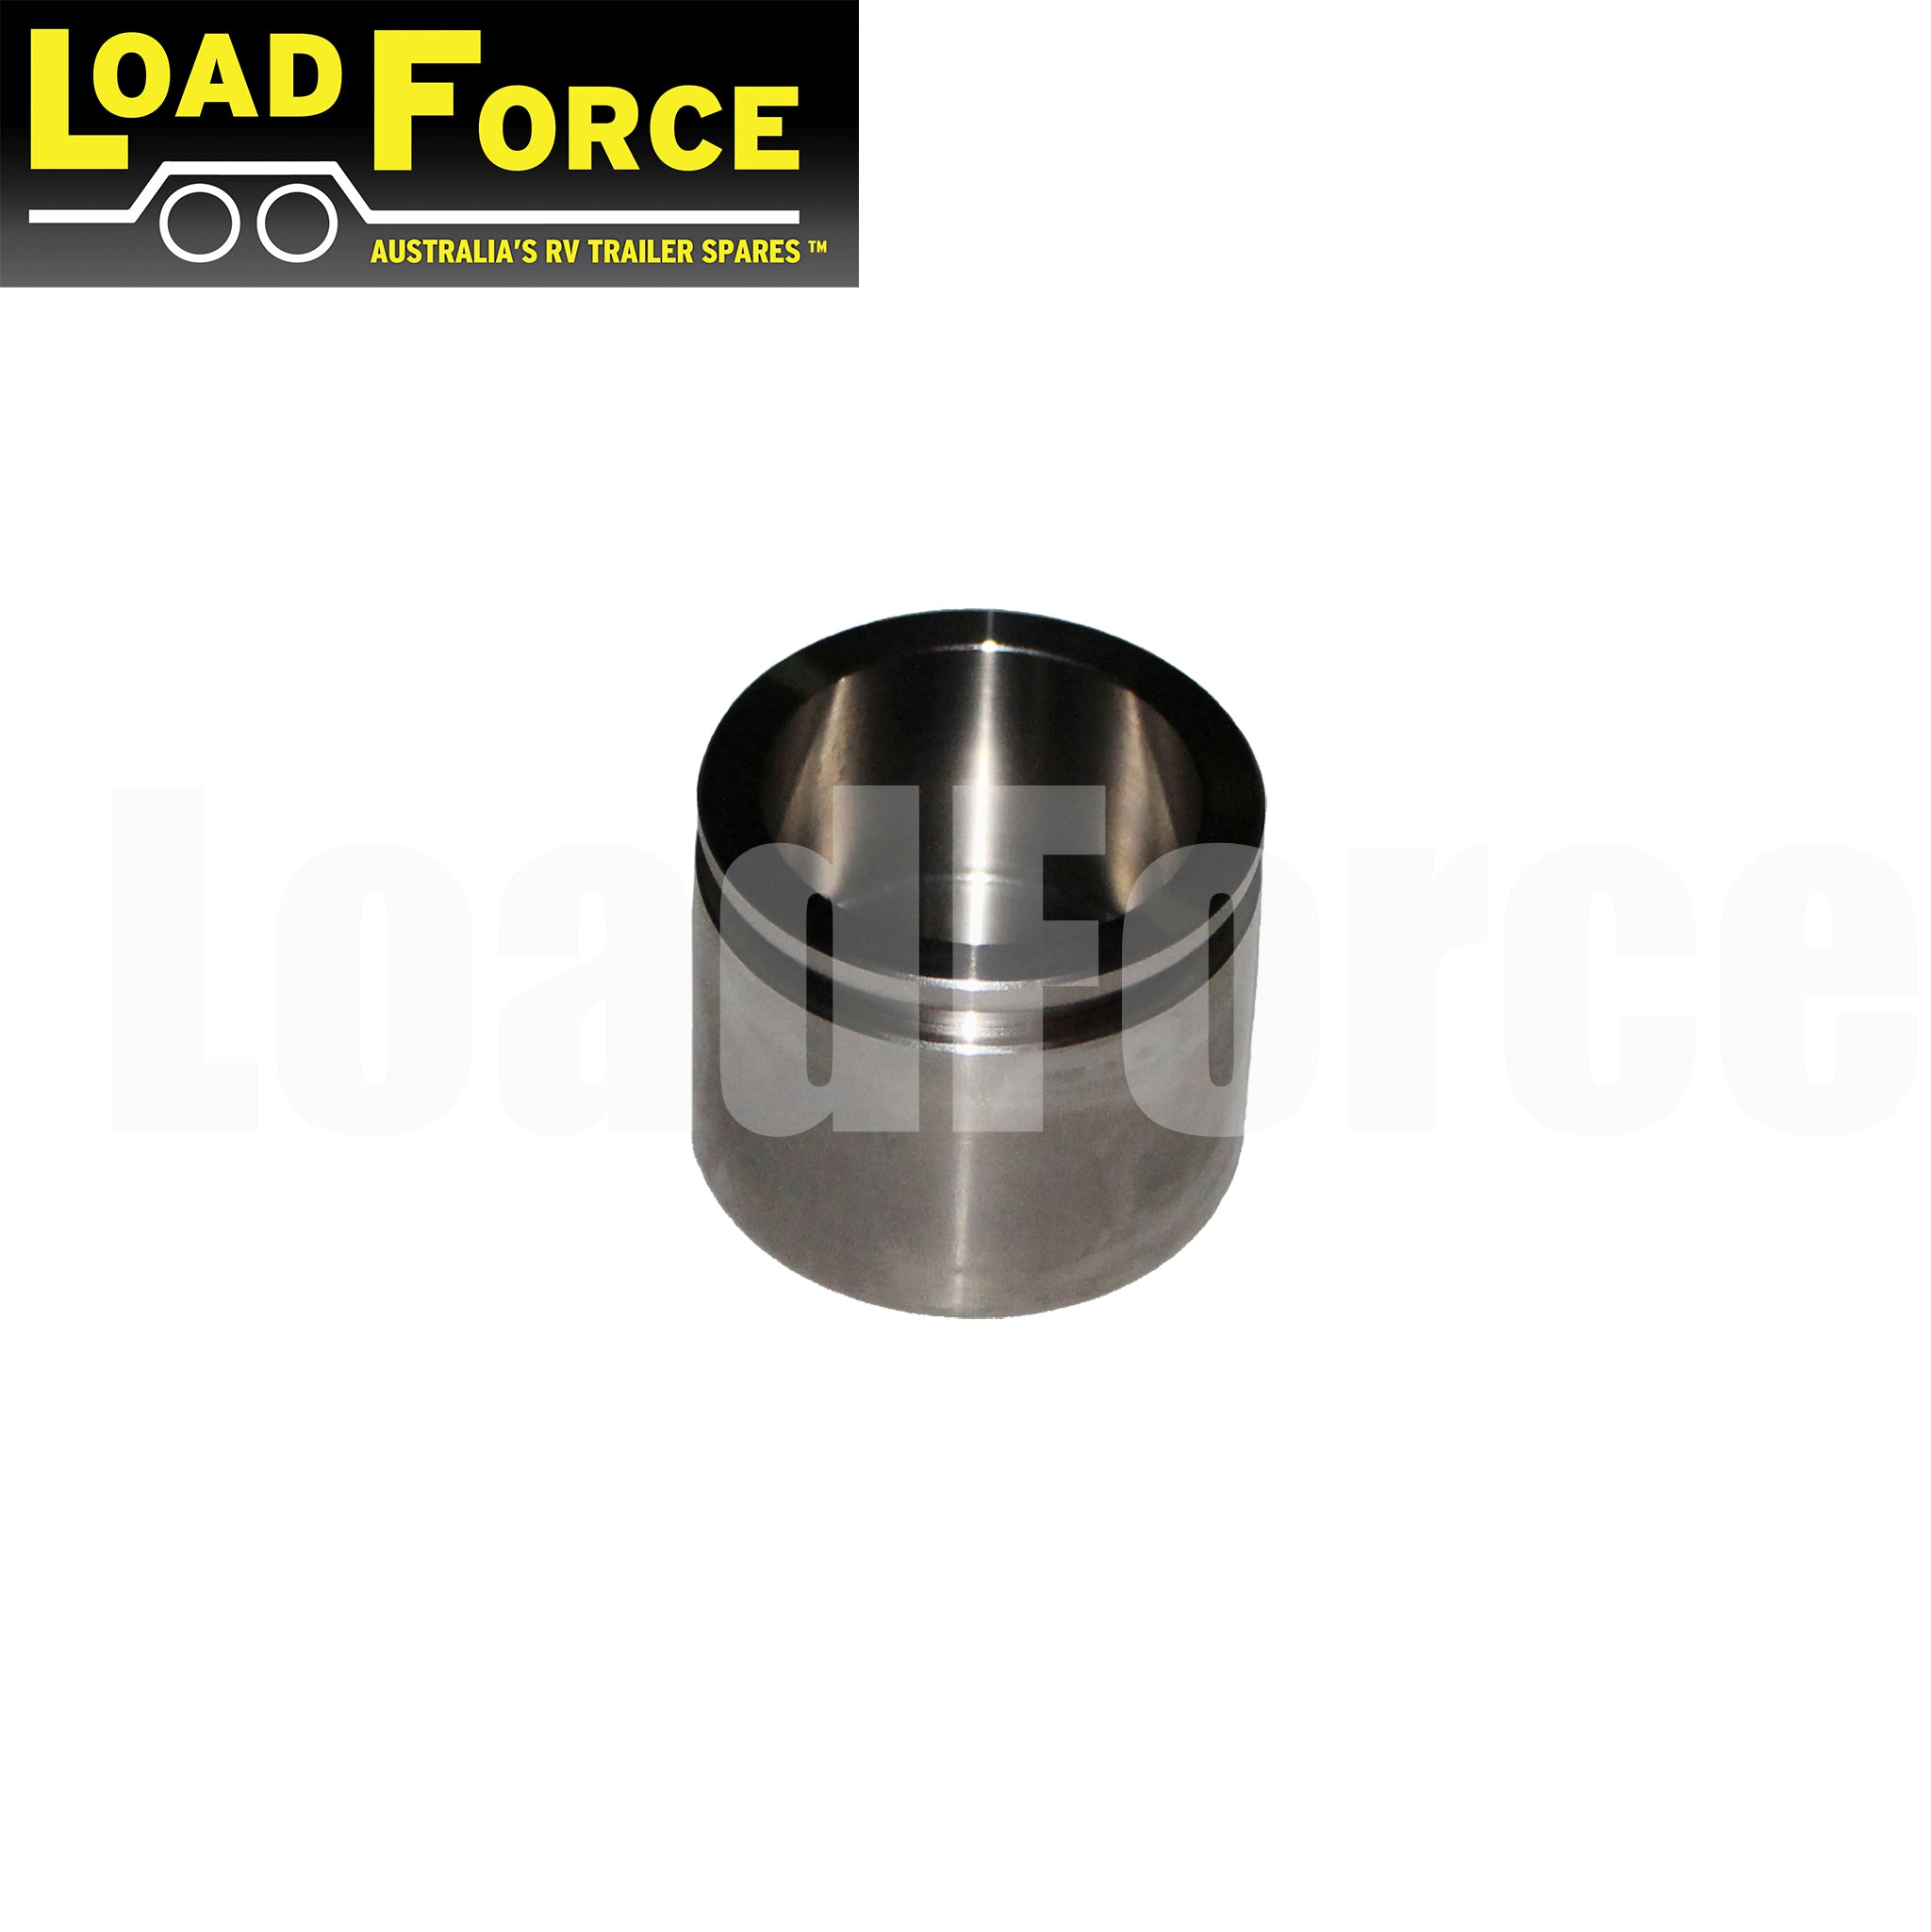 Stainless steel piston for LoadForce T2 and PBR type 2 caliper